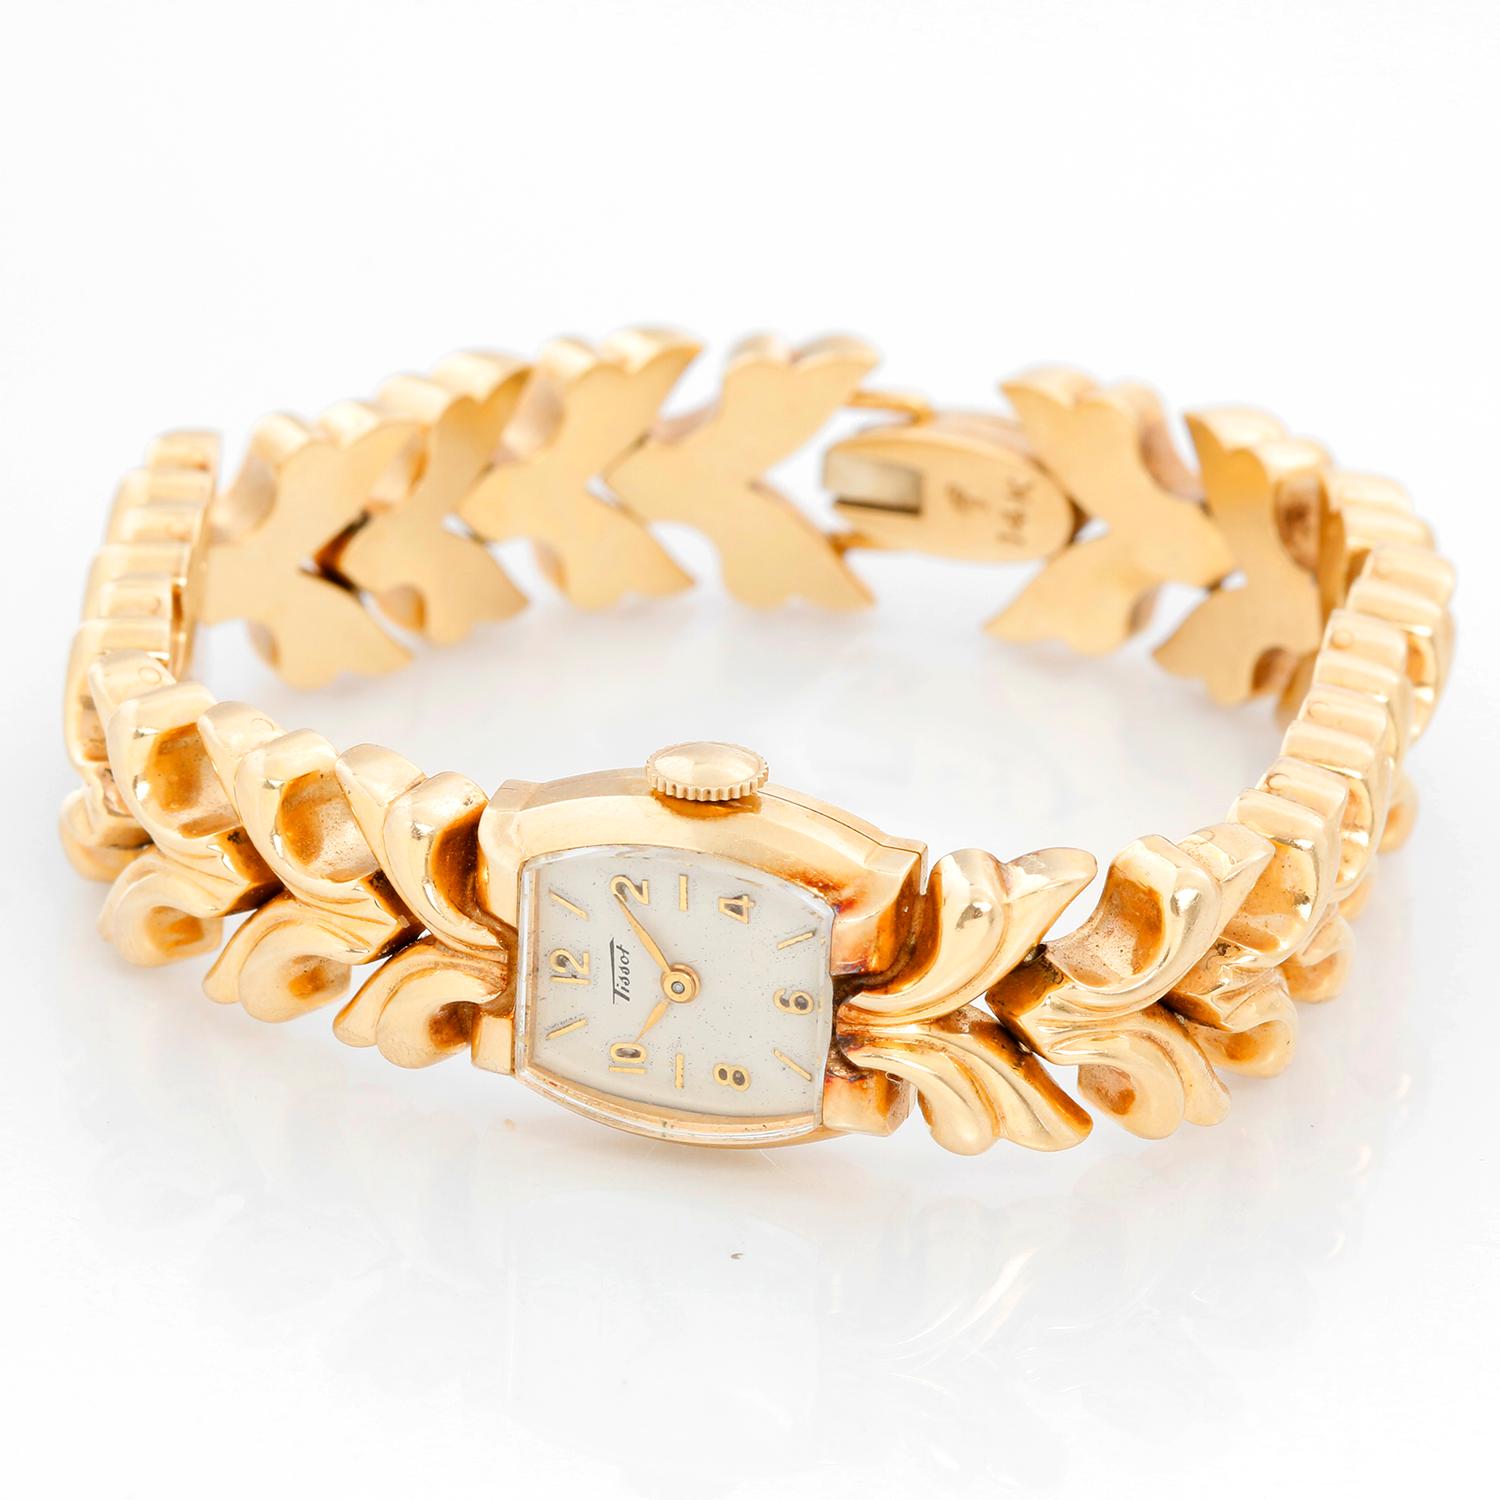 Tissot 14k Yellow Gold Manual Ladies Watch - Manual winding. 14K Yellow gold (16 x 7mm). White dial with stick and Arabic hour markers. 14K Yellow gold link bracelet with hinge clasp; will fit a 6 inch wrist. Pre-owned with Tissot box.